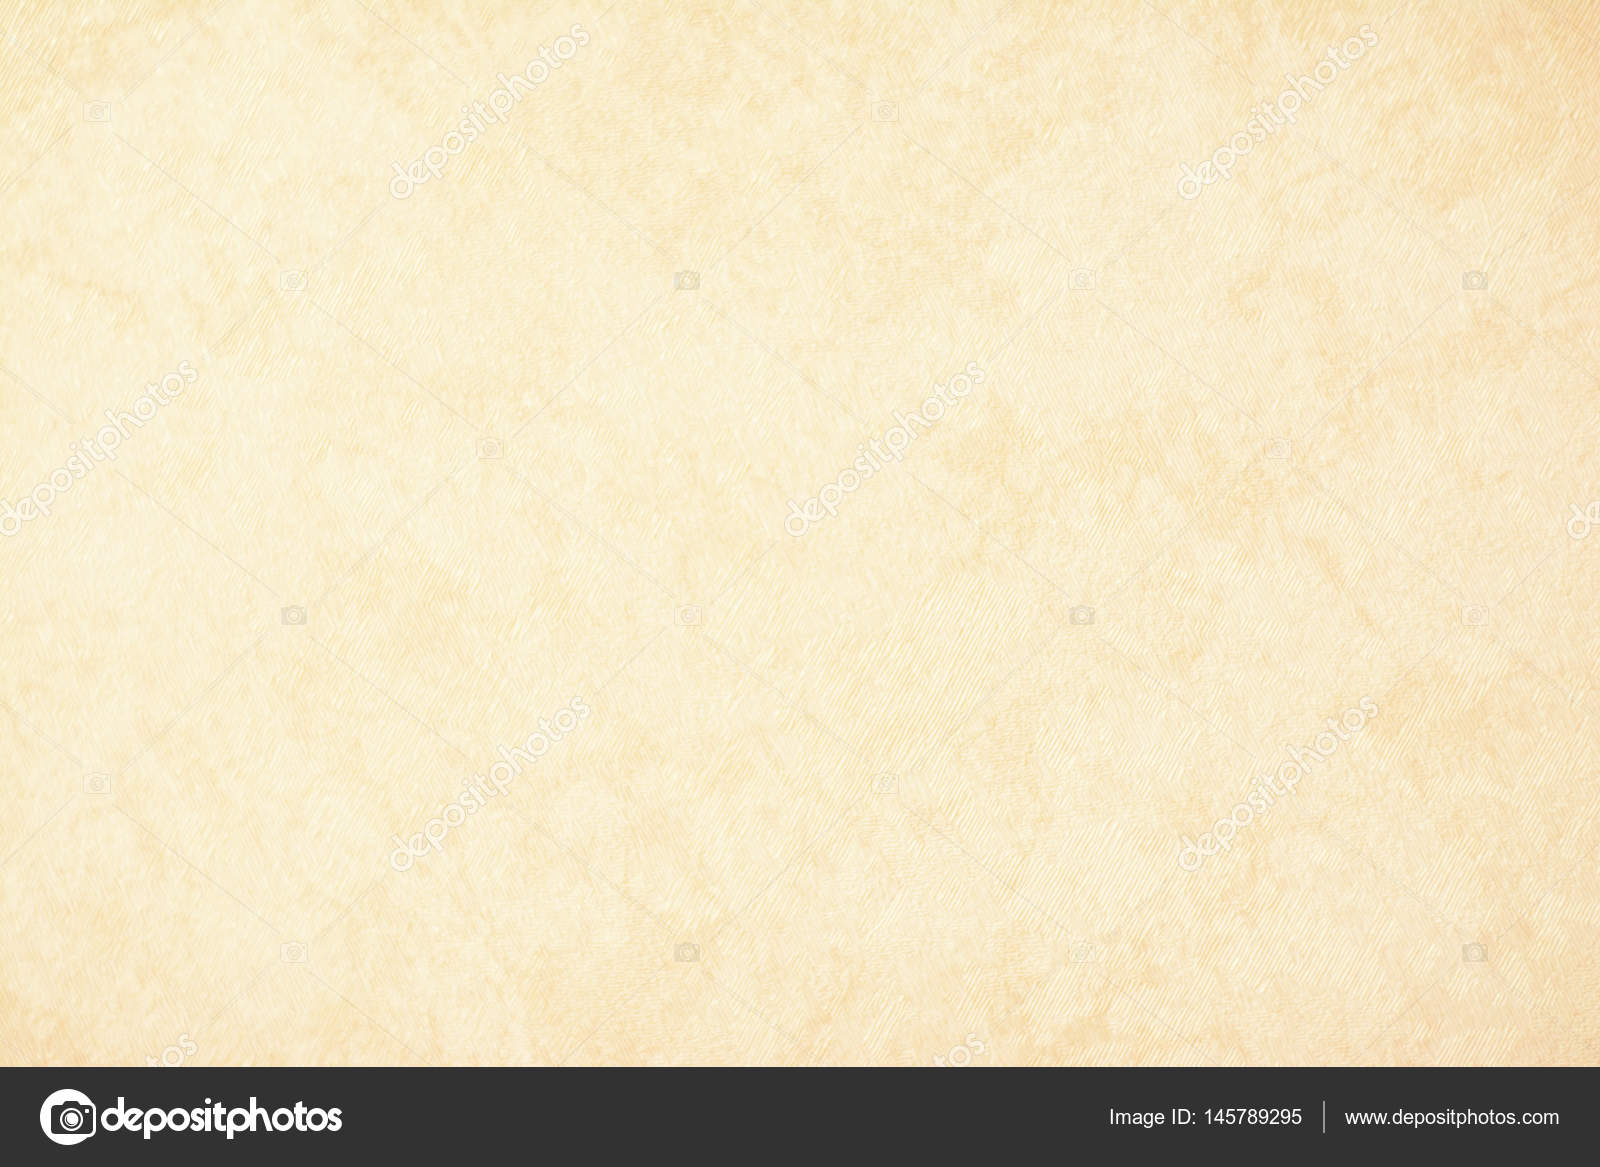 Vintage off white parchment paper background. Stock Photo